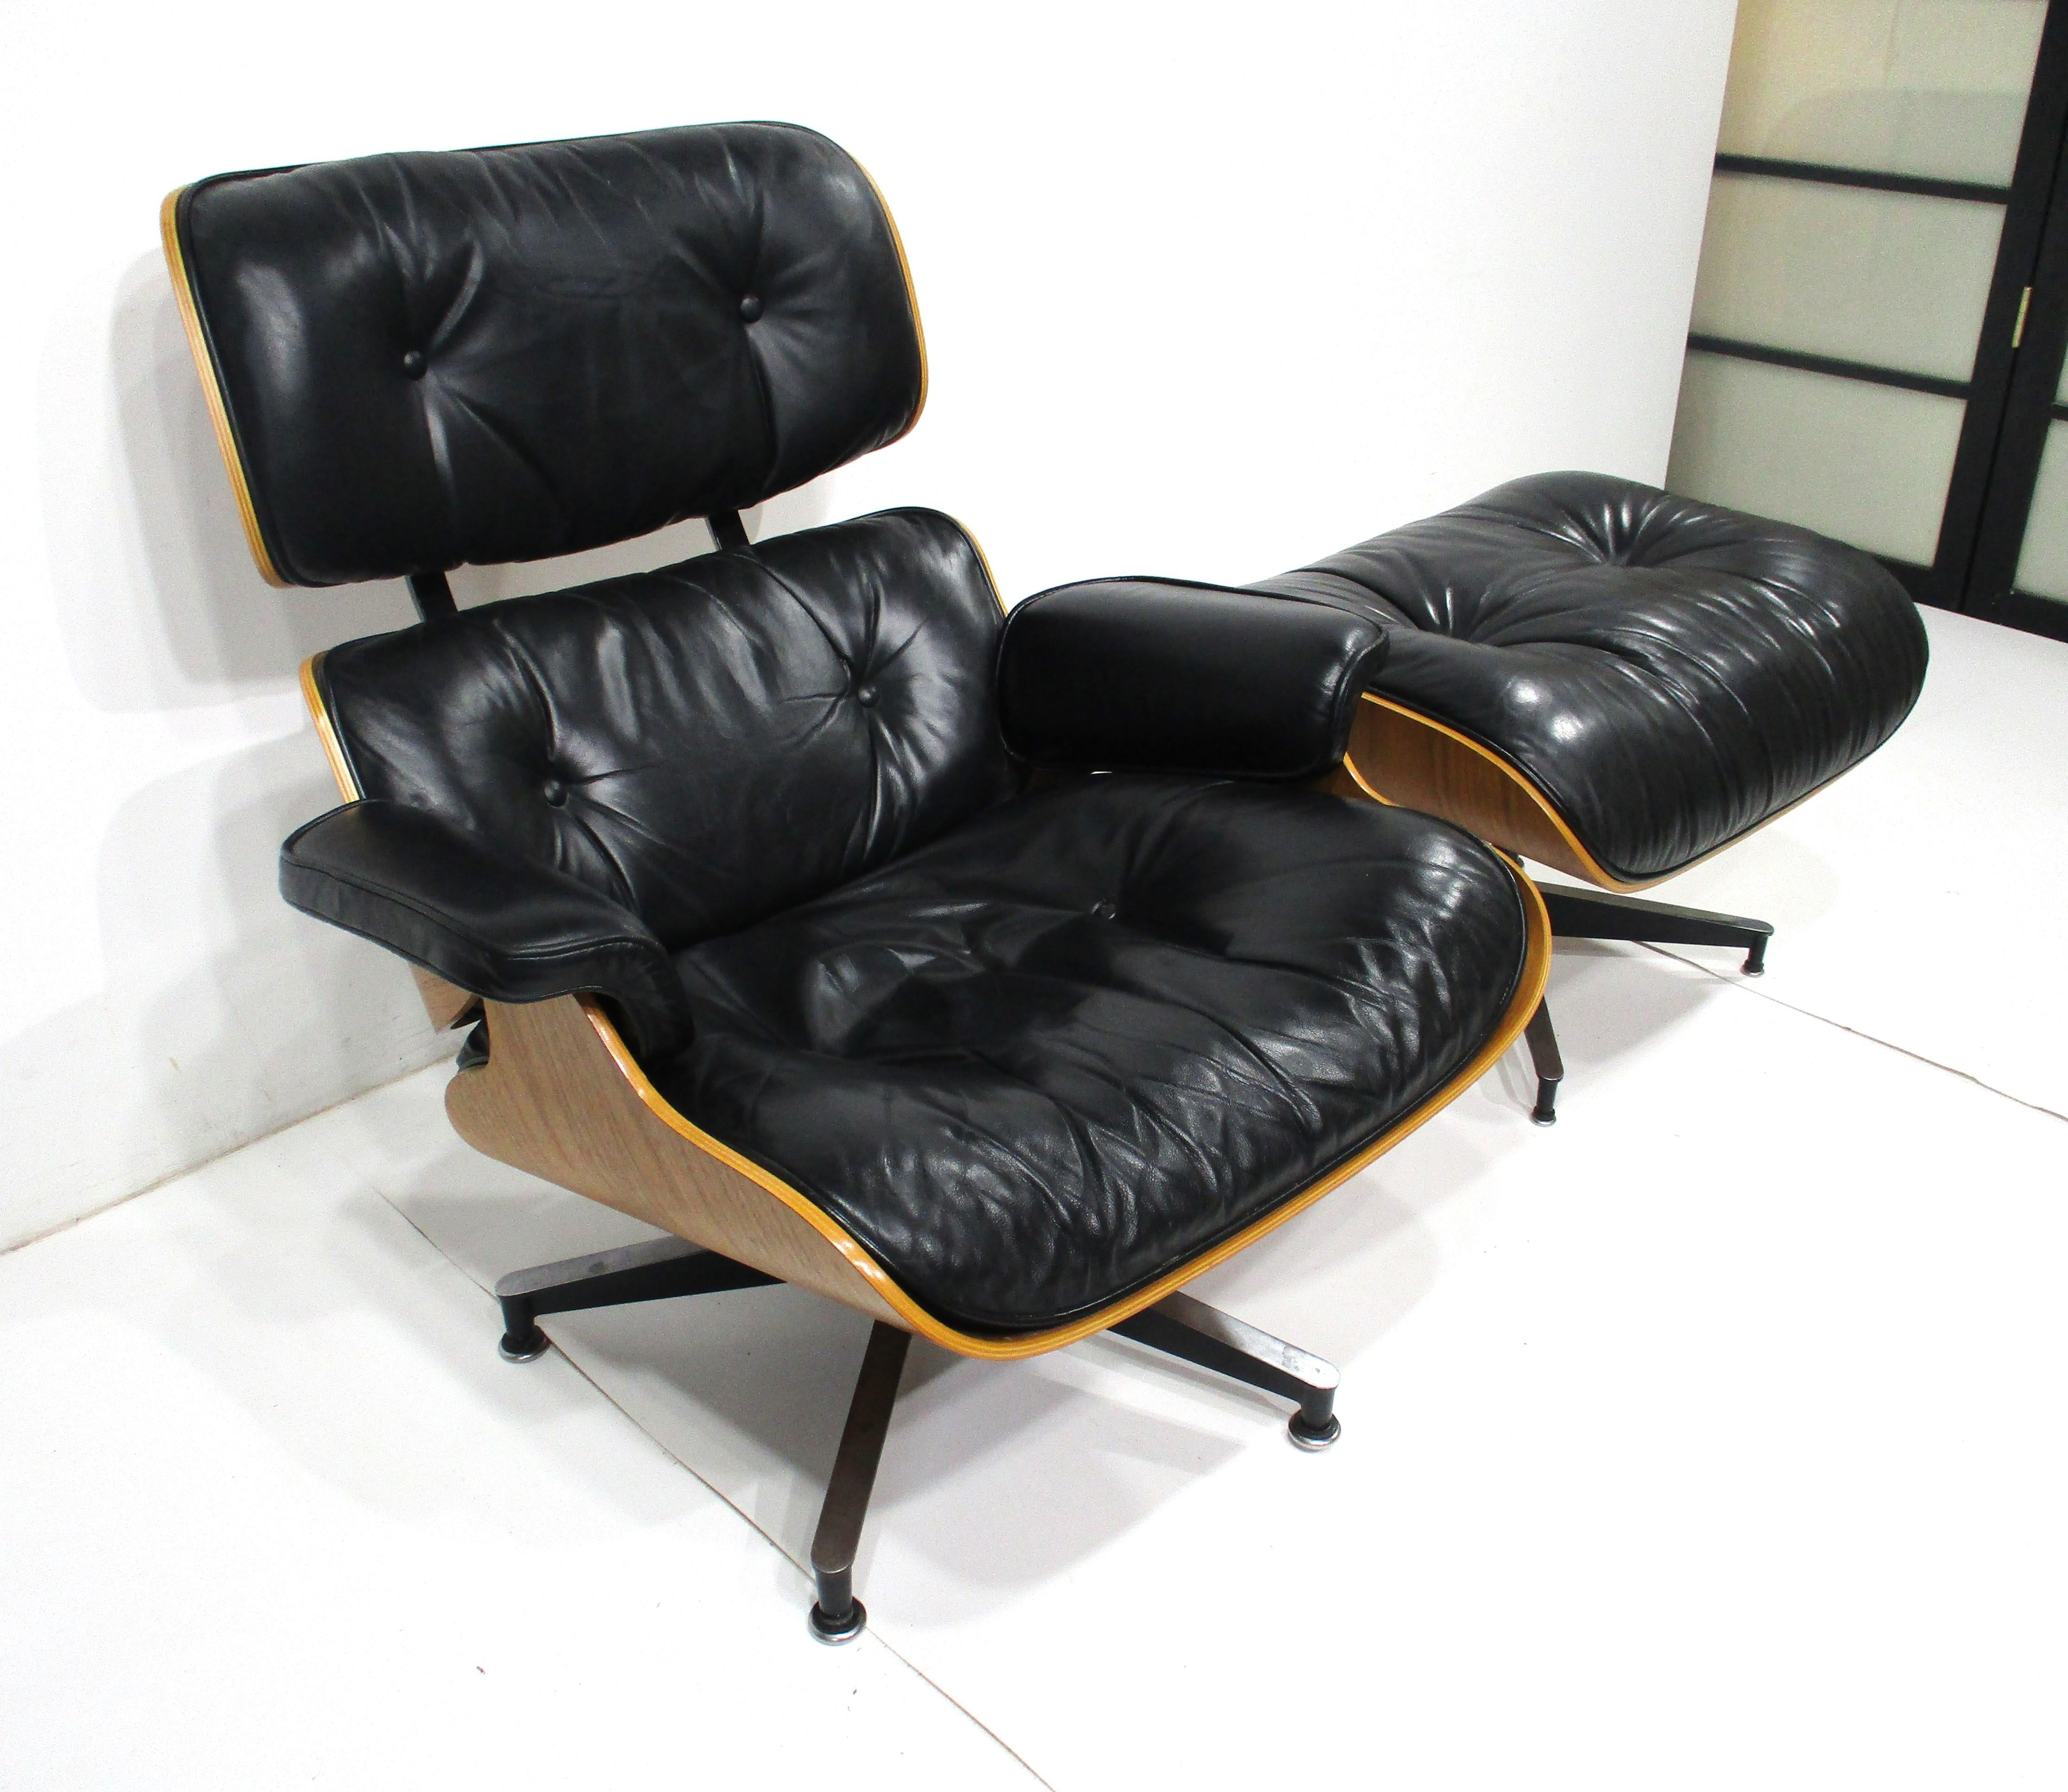 Eames Walnut 670 Lounge Chair with Ottoman by Herman Miller In Good Condition For Sale In Cincinnati, OH